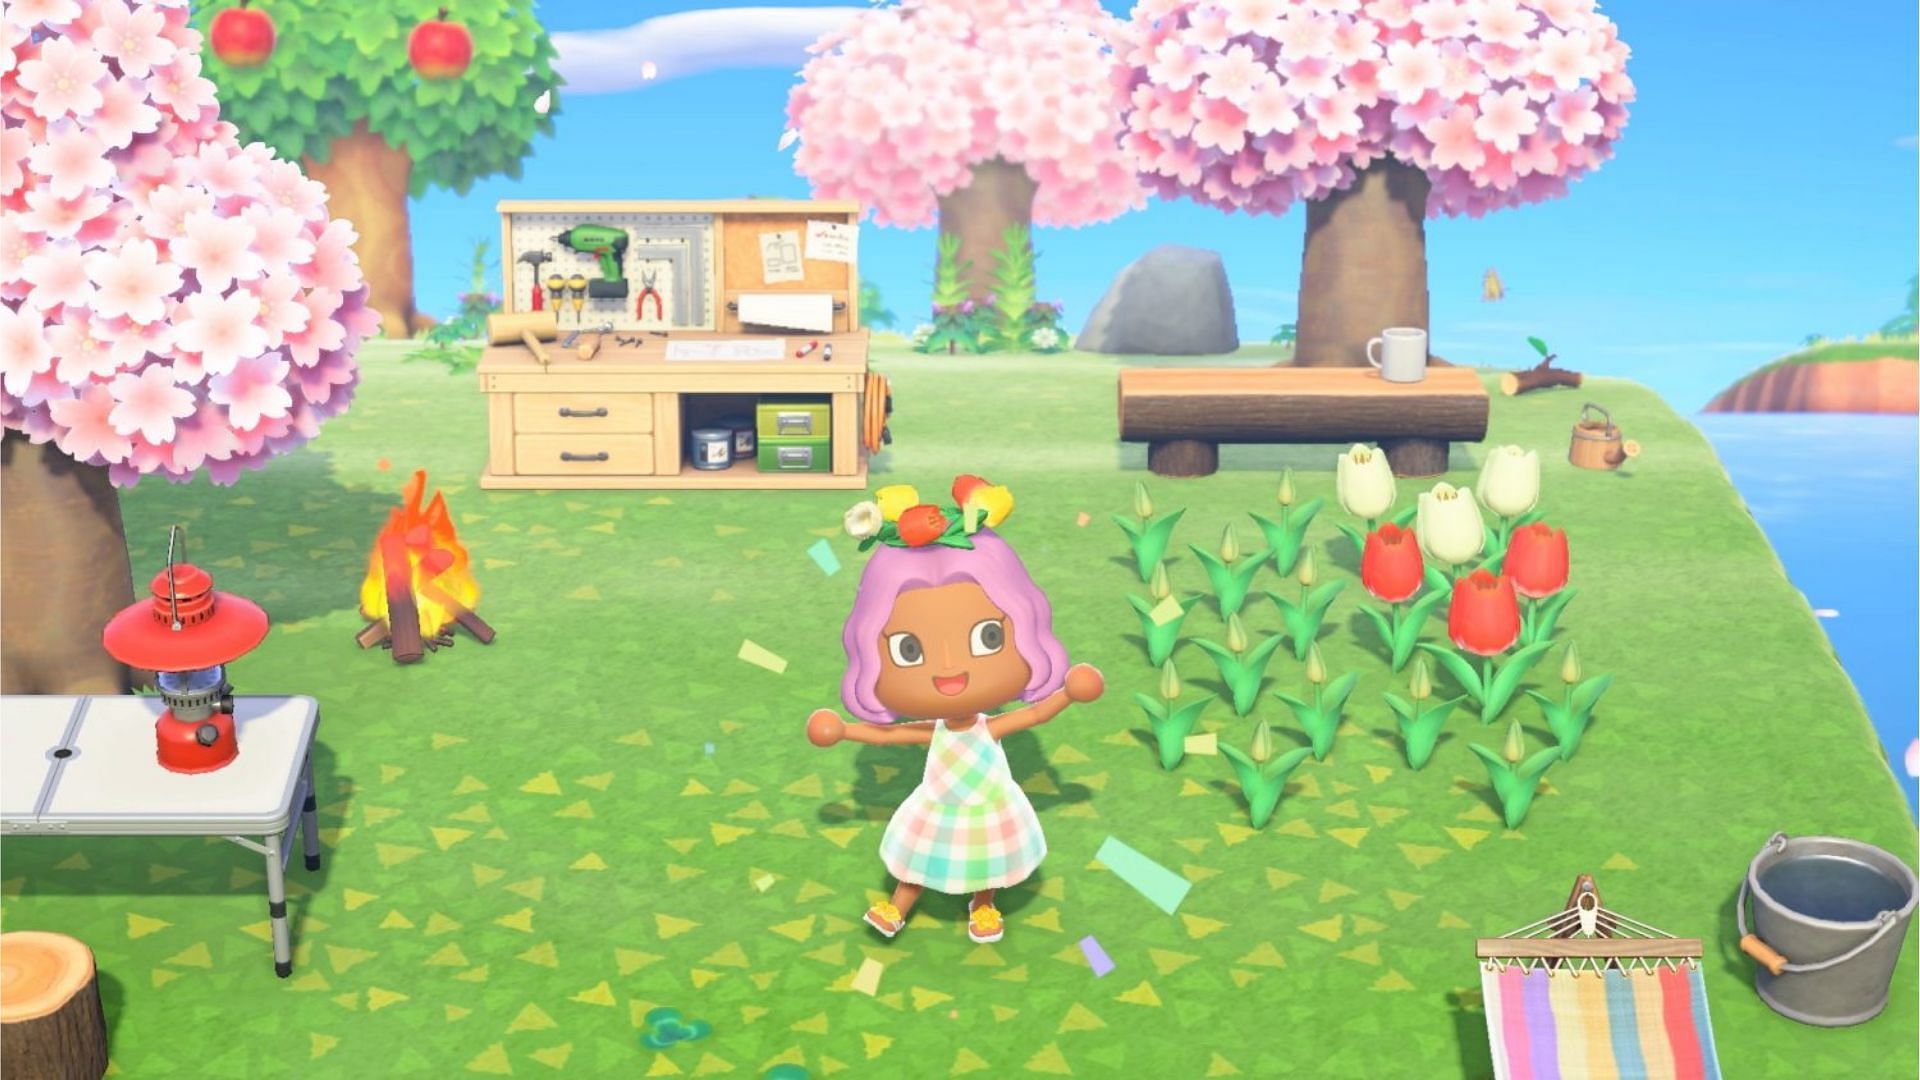 Cherry Blossom season is set to appear in Animal Crossing: New Horizons sooner than players would expect (Image via WAMU)